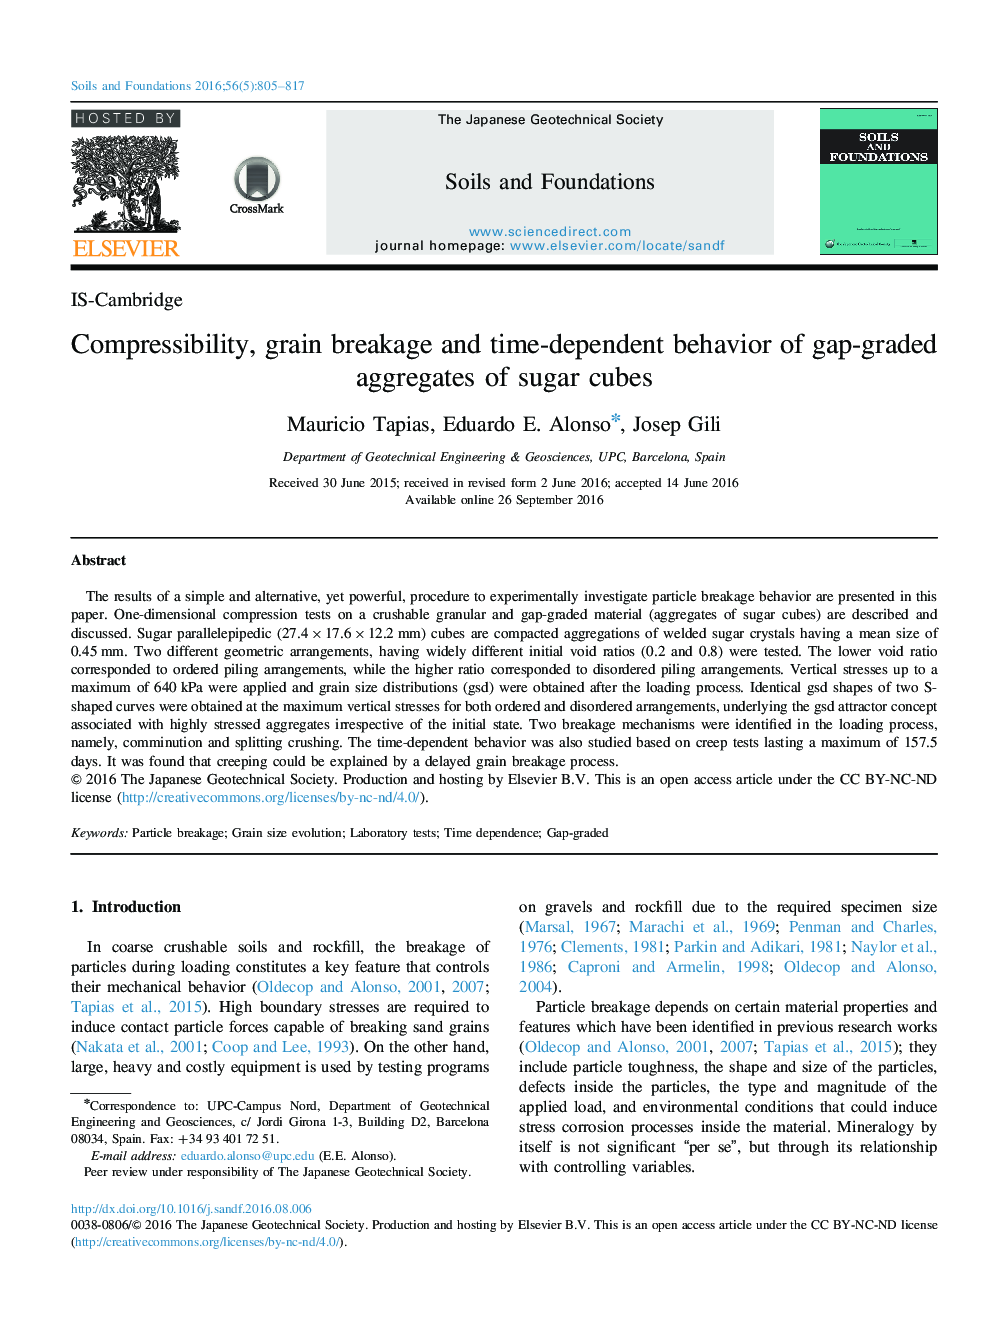 IS-CambridgeCompressibility, grain breakage and time-dependent behavior of gap-graded aggregates of sugar cubes